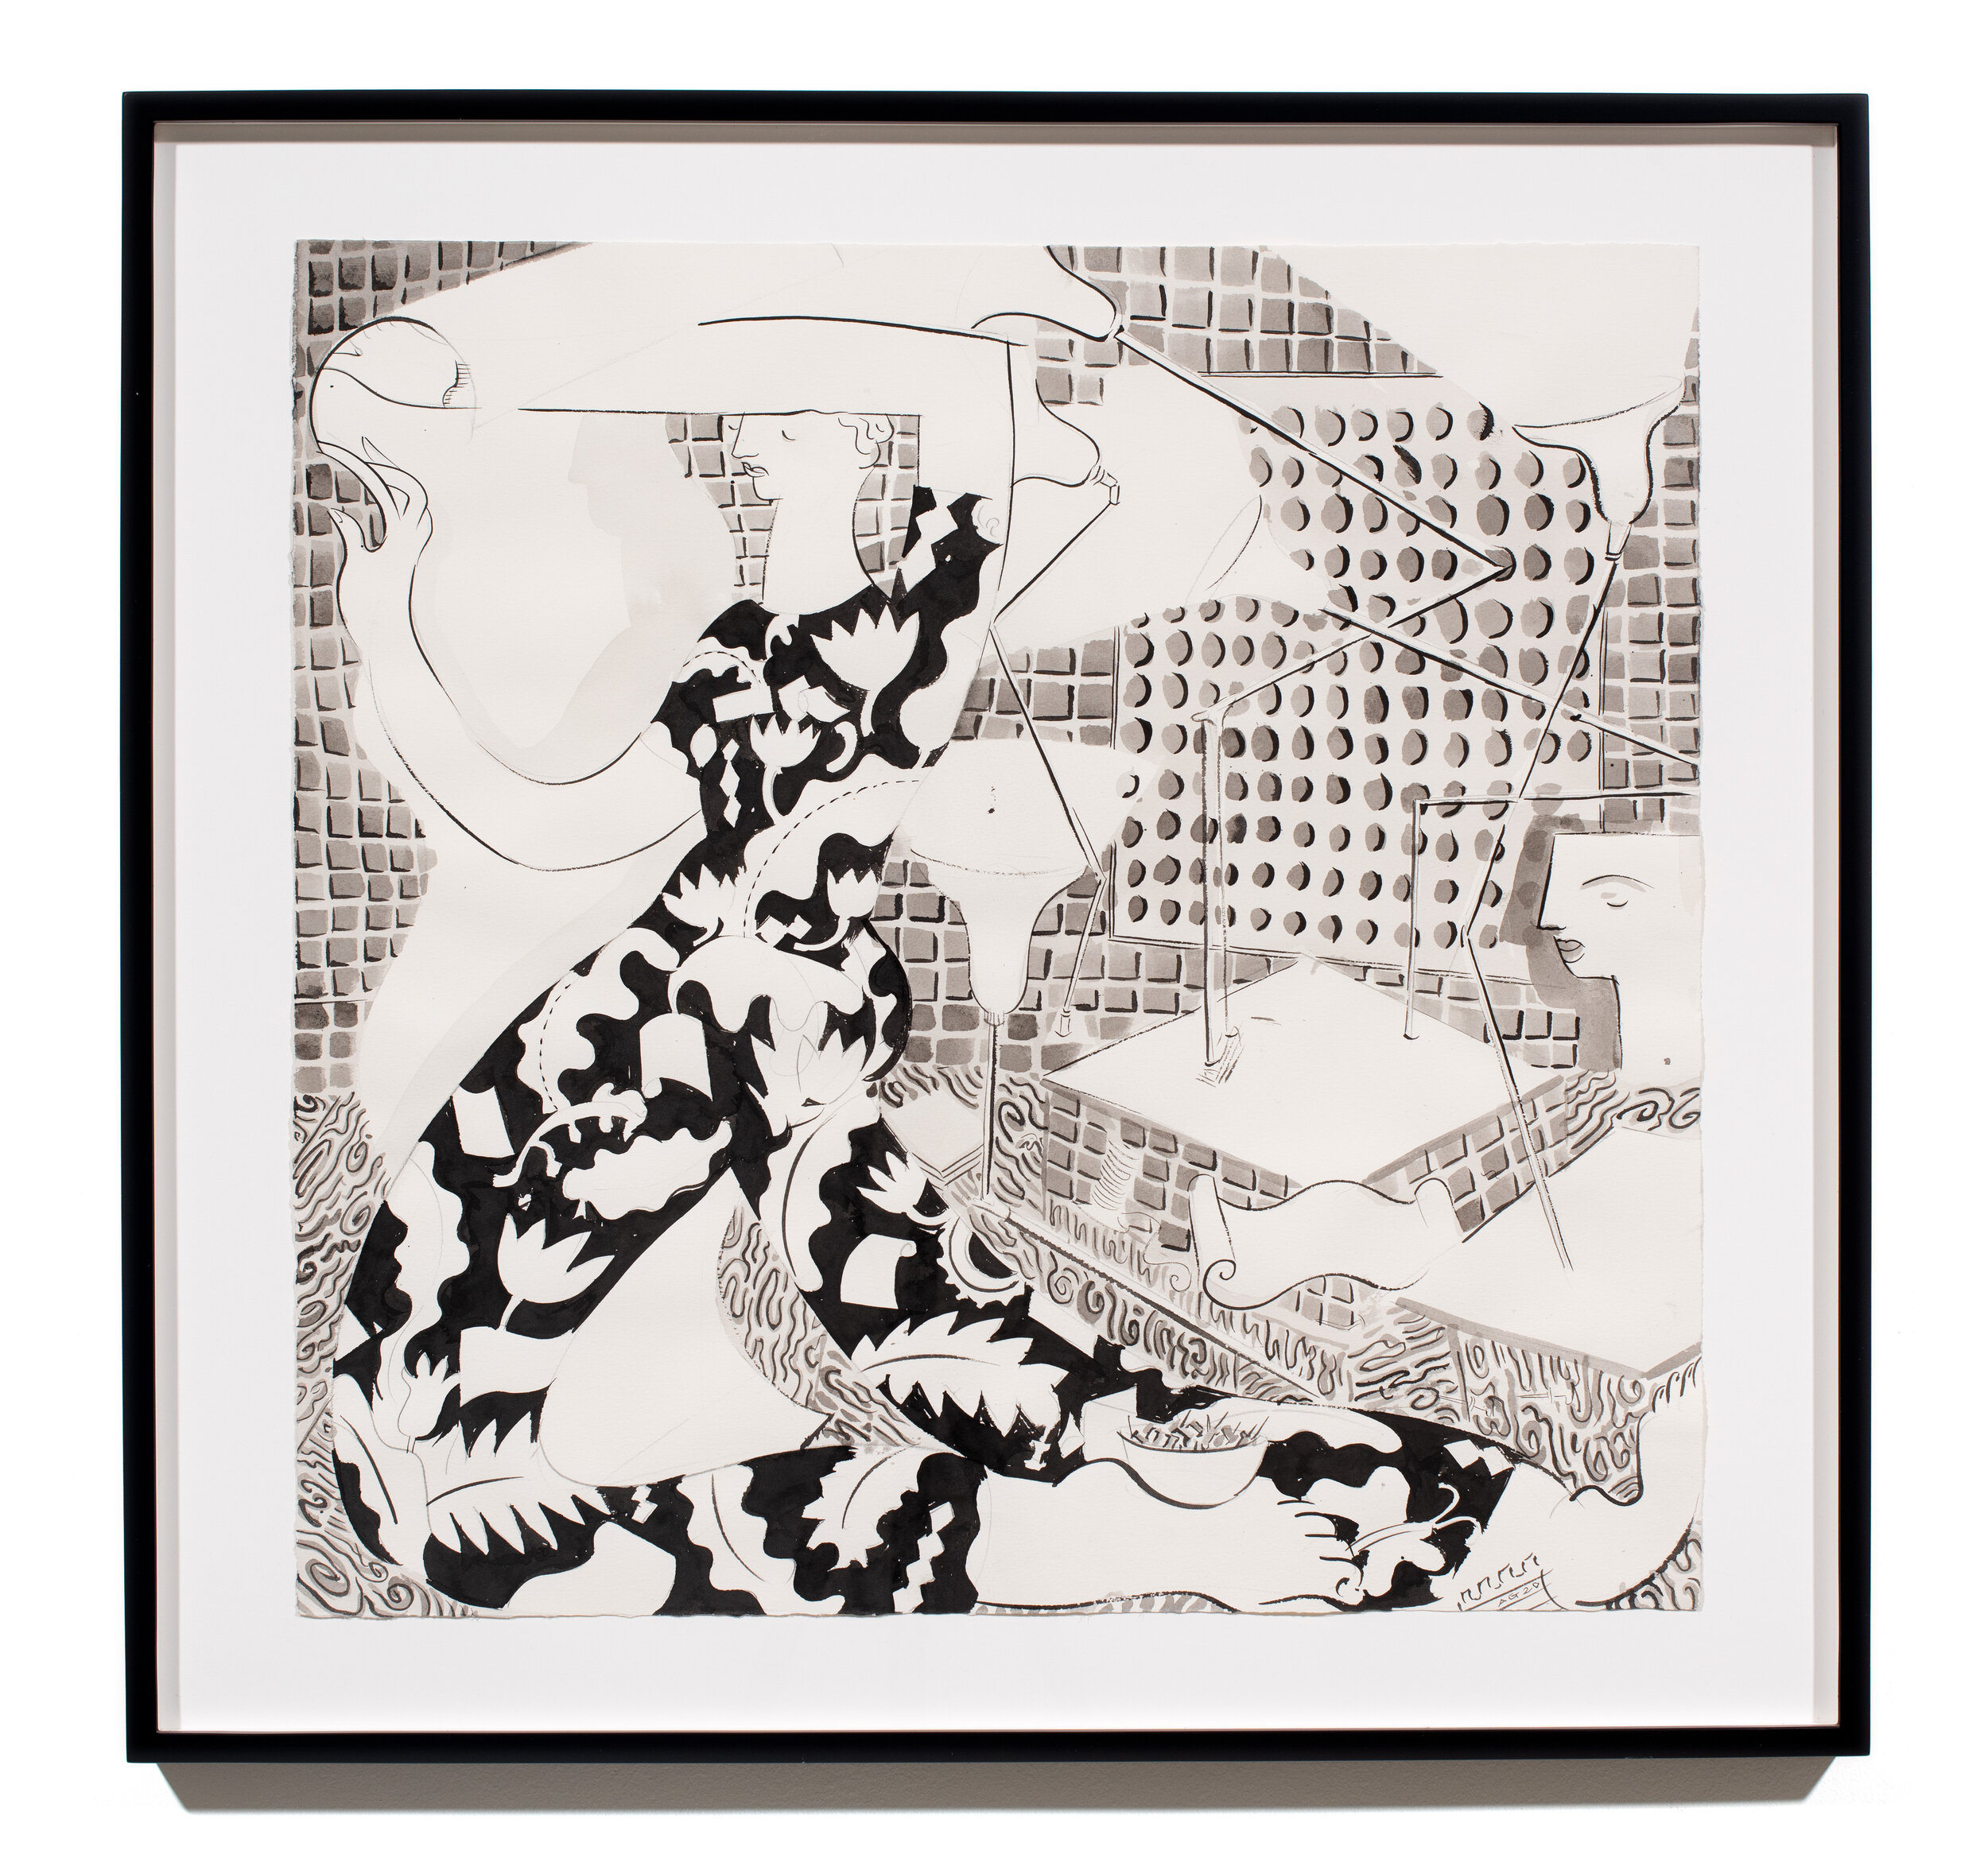   Harmony and Light , 2020&nbsp; Ink, ink wash, and pencil on paper&nbsp; 26 1/2 x 28 x 1 3/4 inches (framed)&nbsp; 